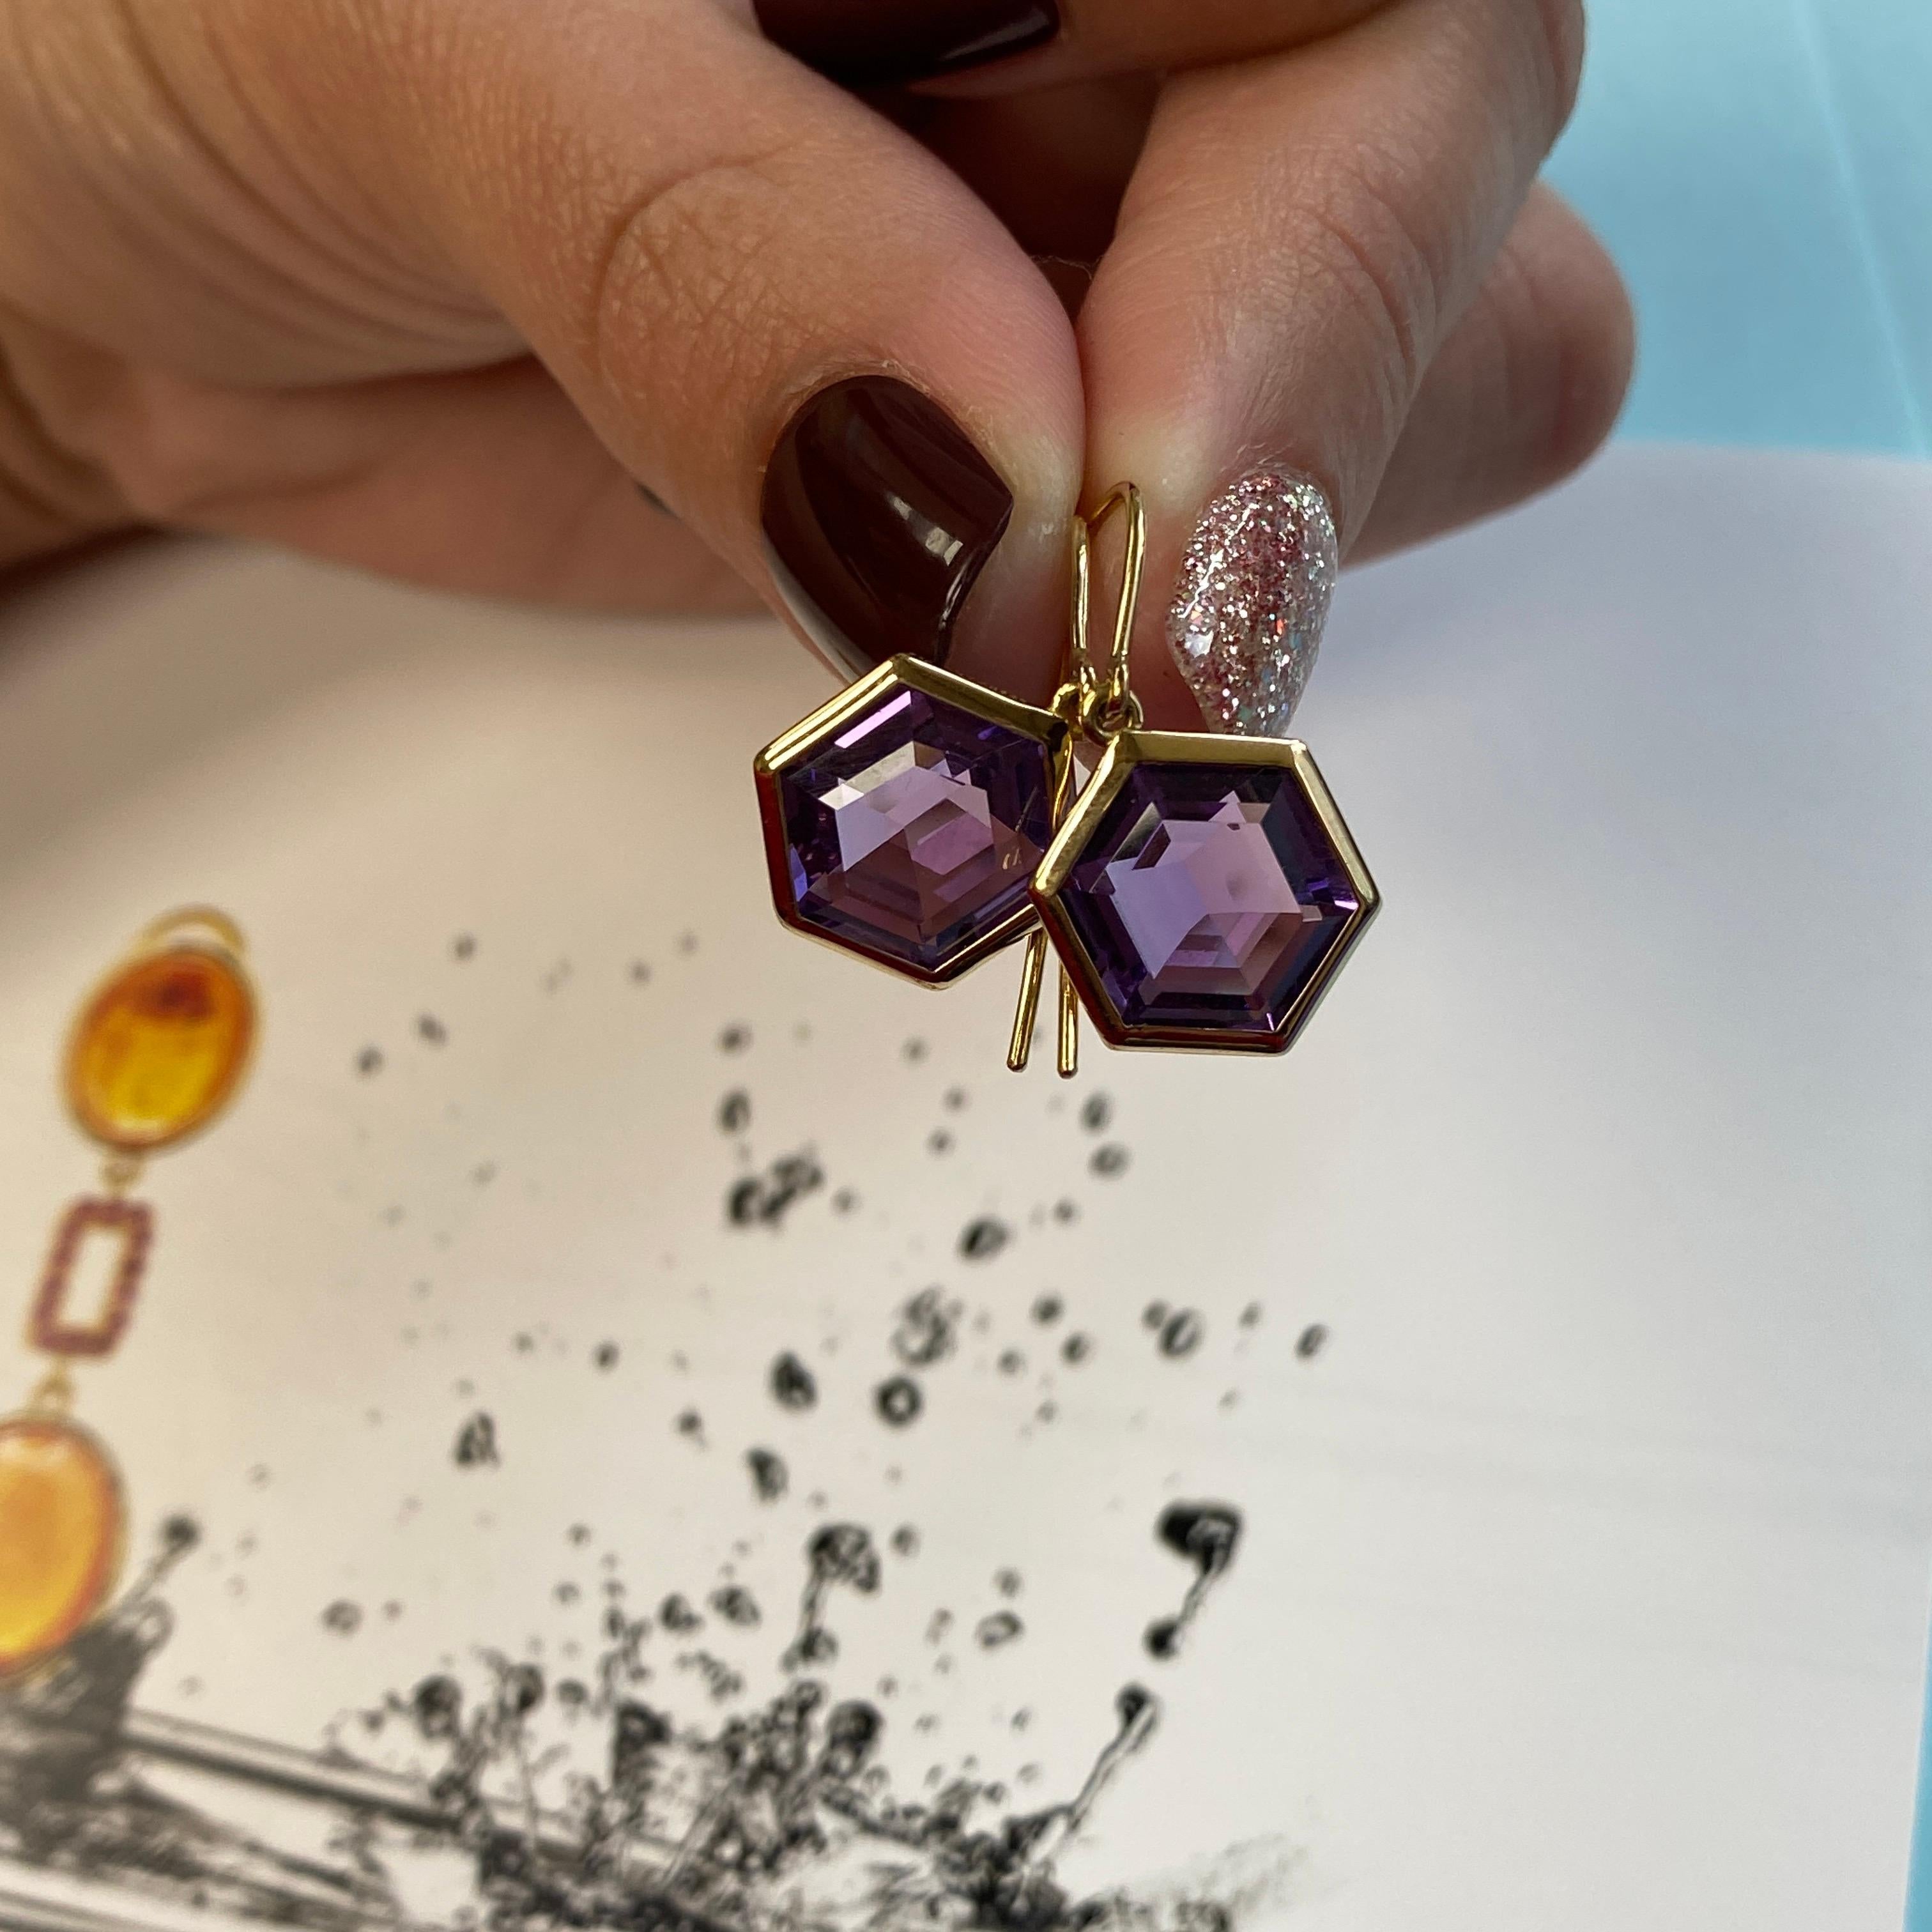 Elevate your style with these exquisite earrings featuring a stunning 12 x 10 mm Hexagon gemstone. Expertly set on a delicate wire of 18K Gold, Their versatile design seamlessly transitions from a chic daytime accessory to an elegant statement piece